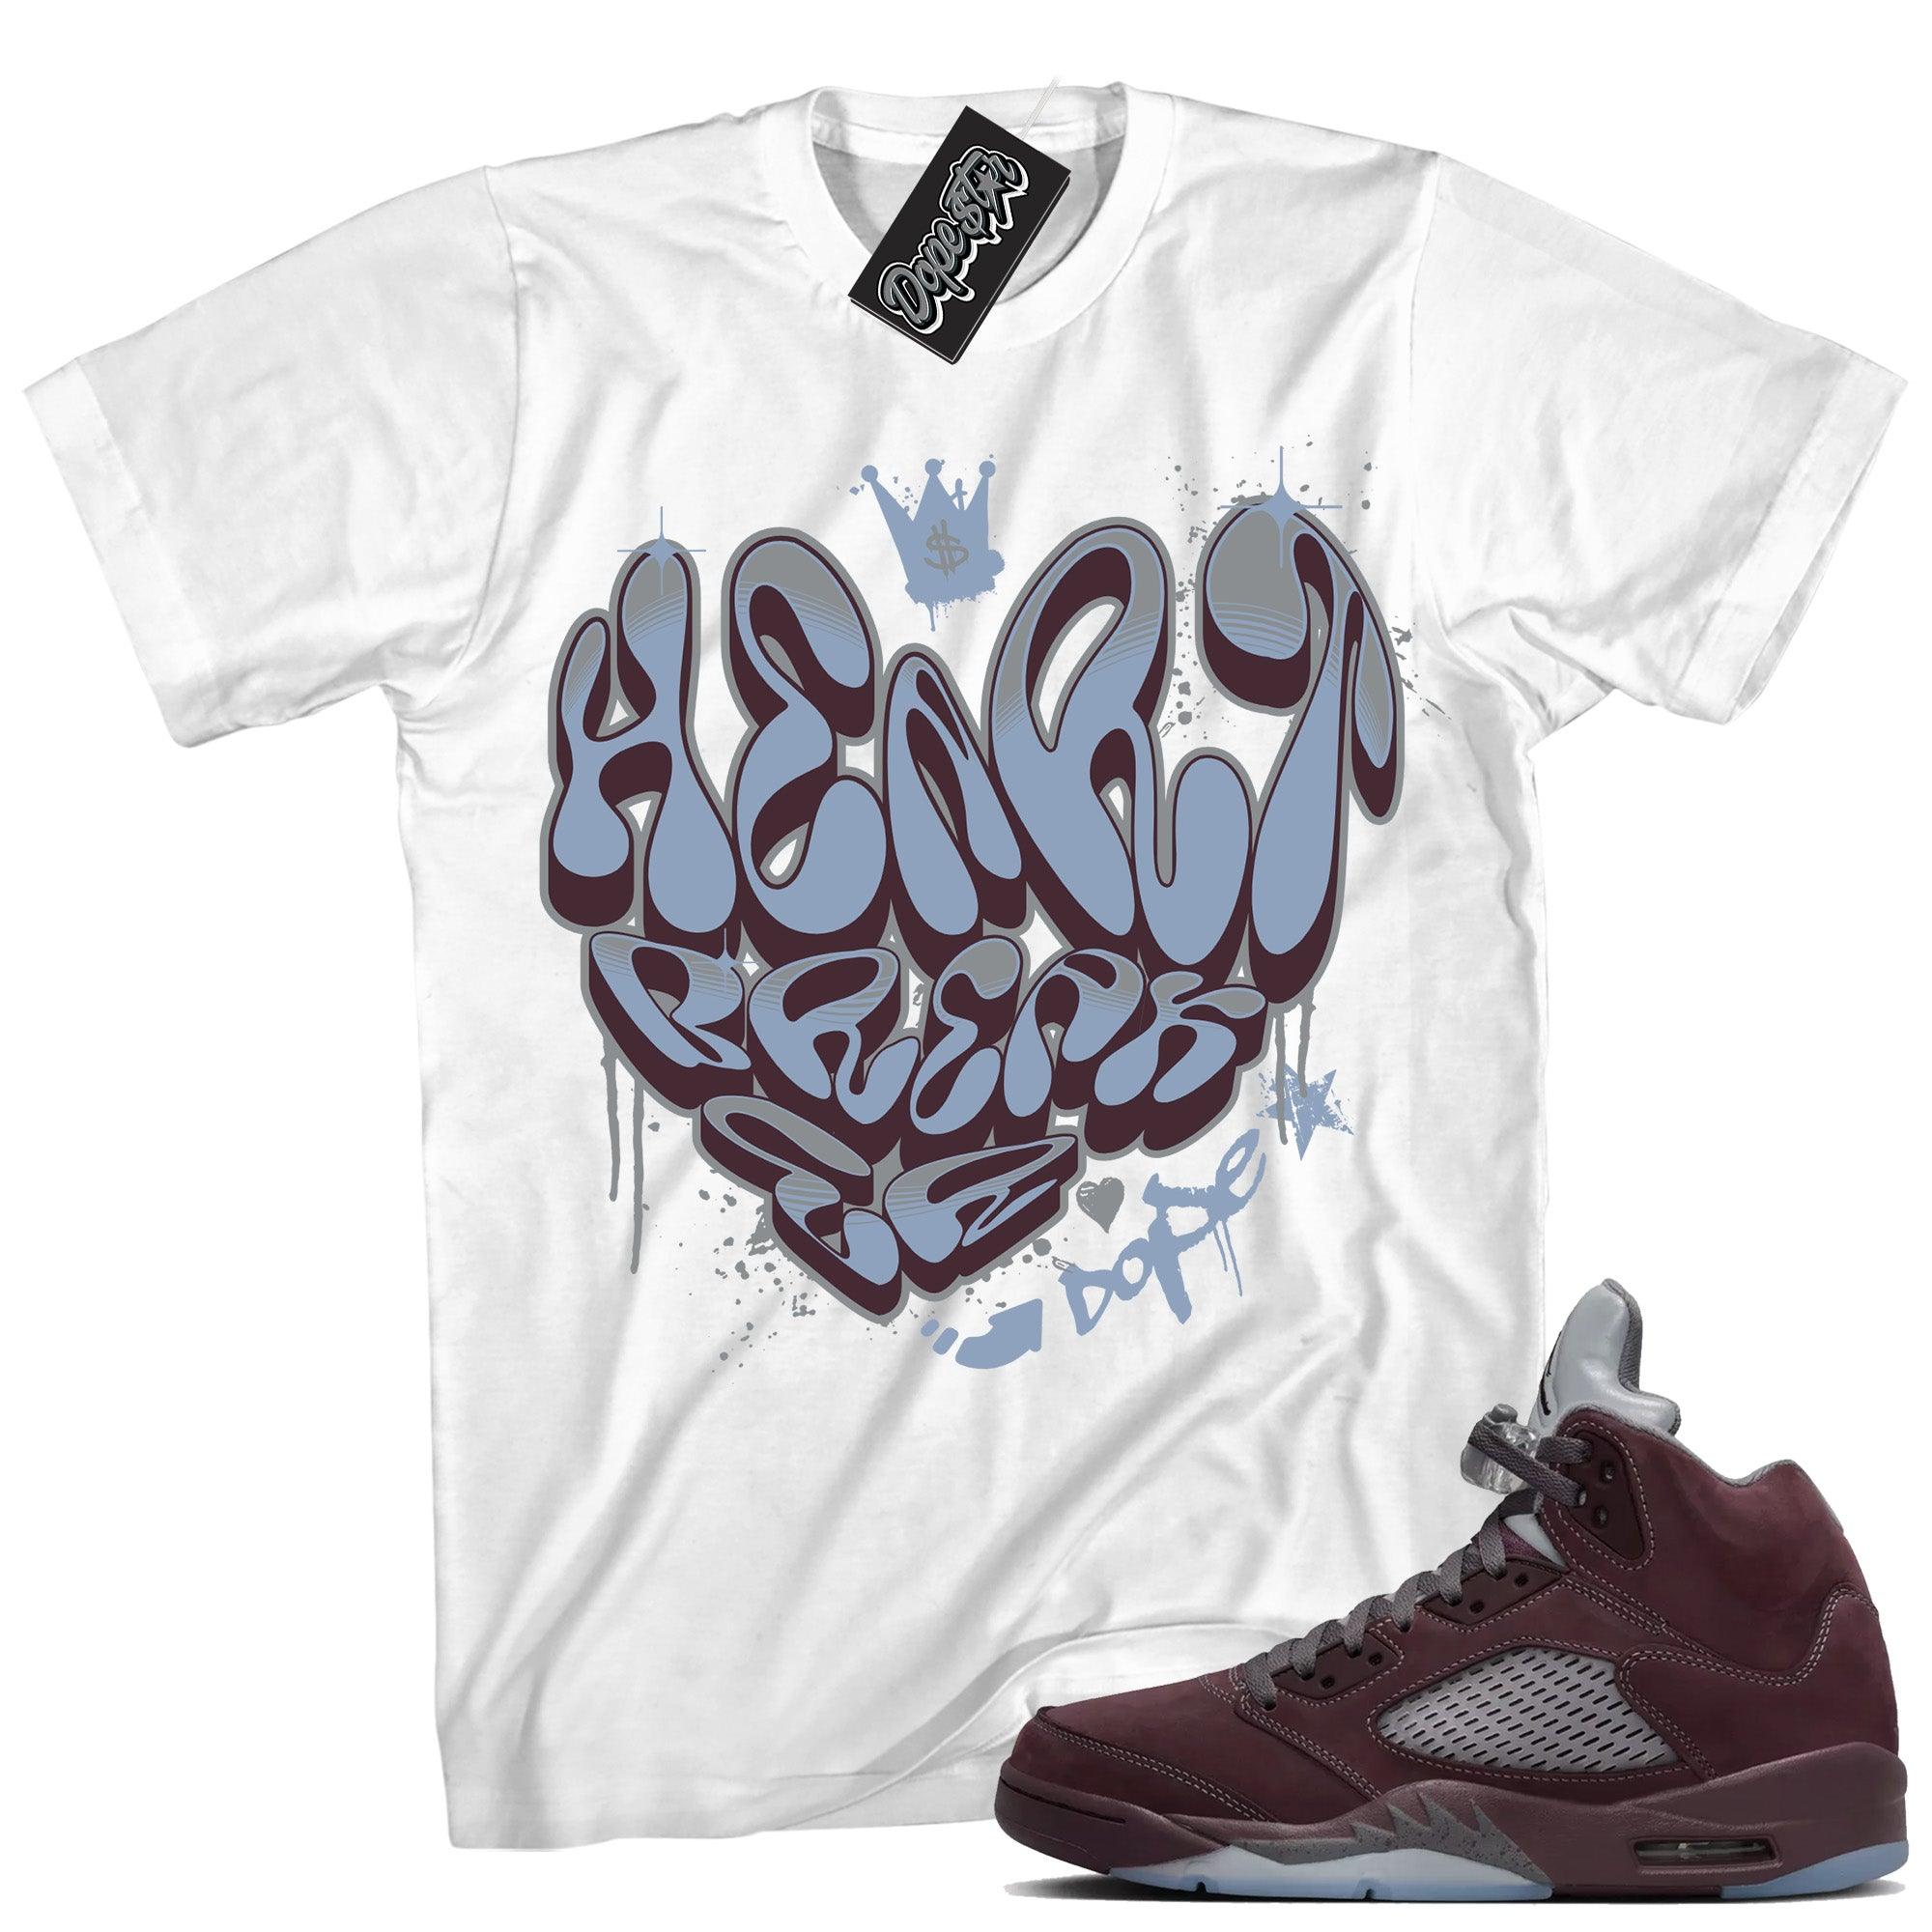 Cool White graphic tee with “ Heartbreaker Graffiti ” print, that perfectly matches Air Jordan 5 Burgundy 2023 sneakers